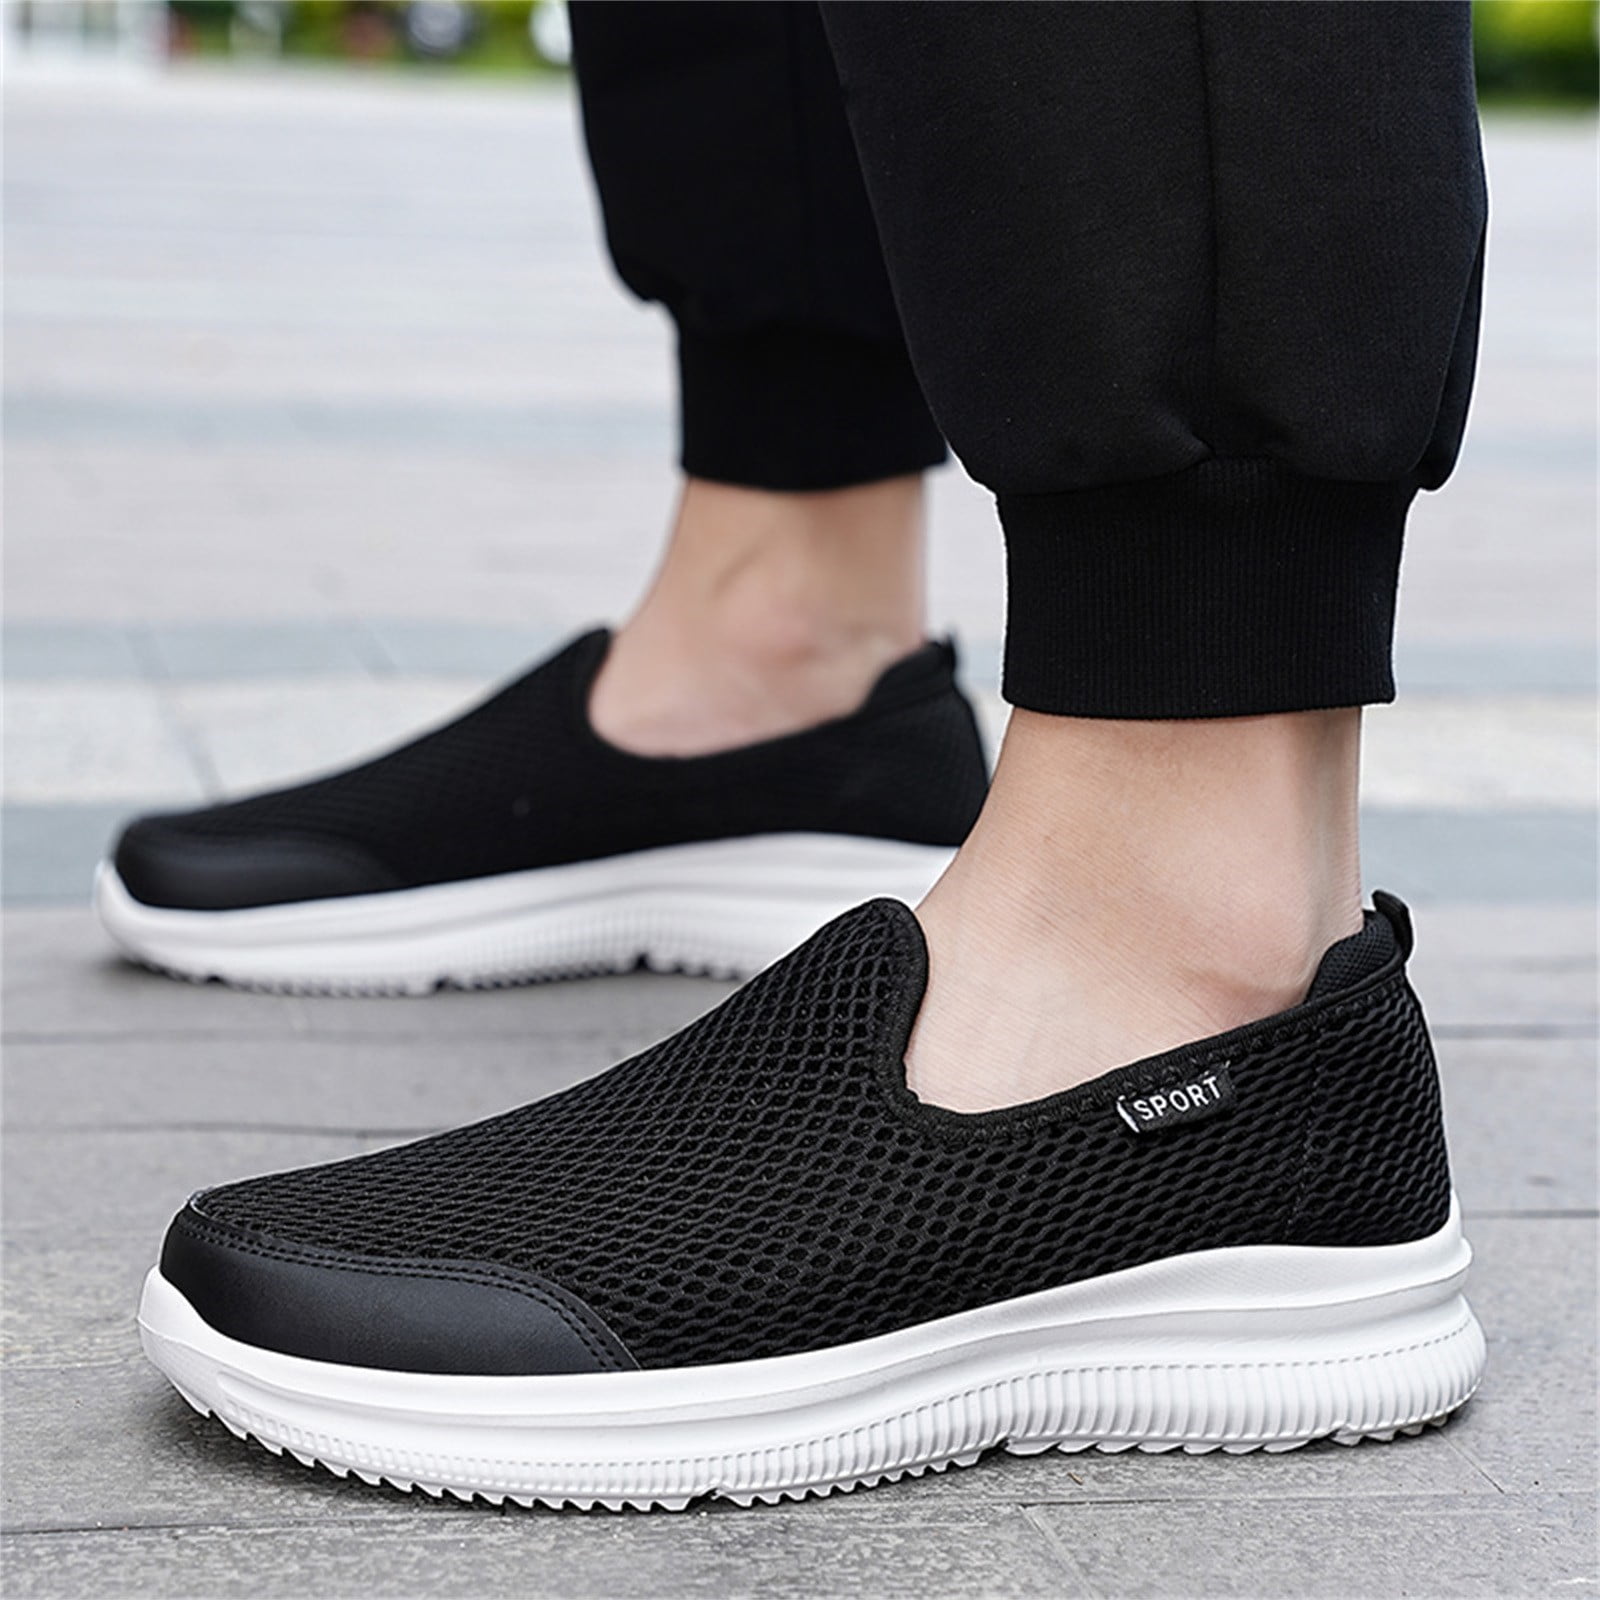 The Best Slip-On Sneakers for Men and Women. Nike.com